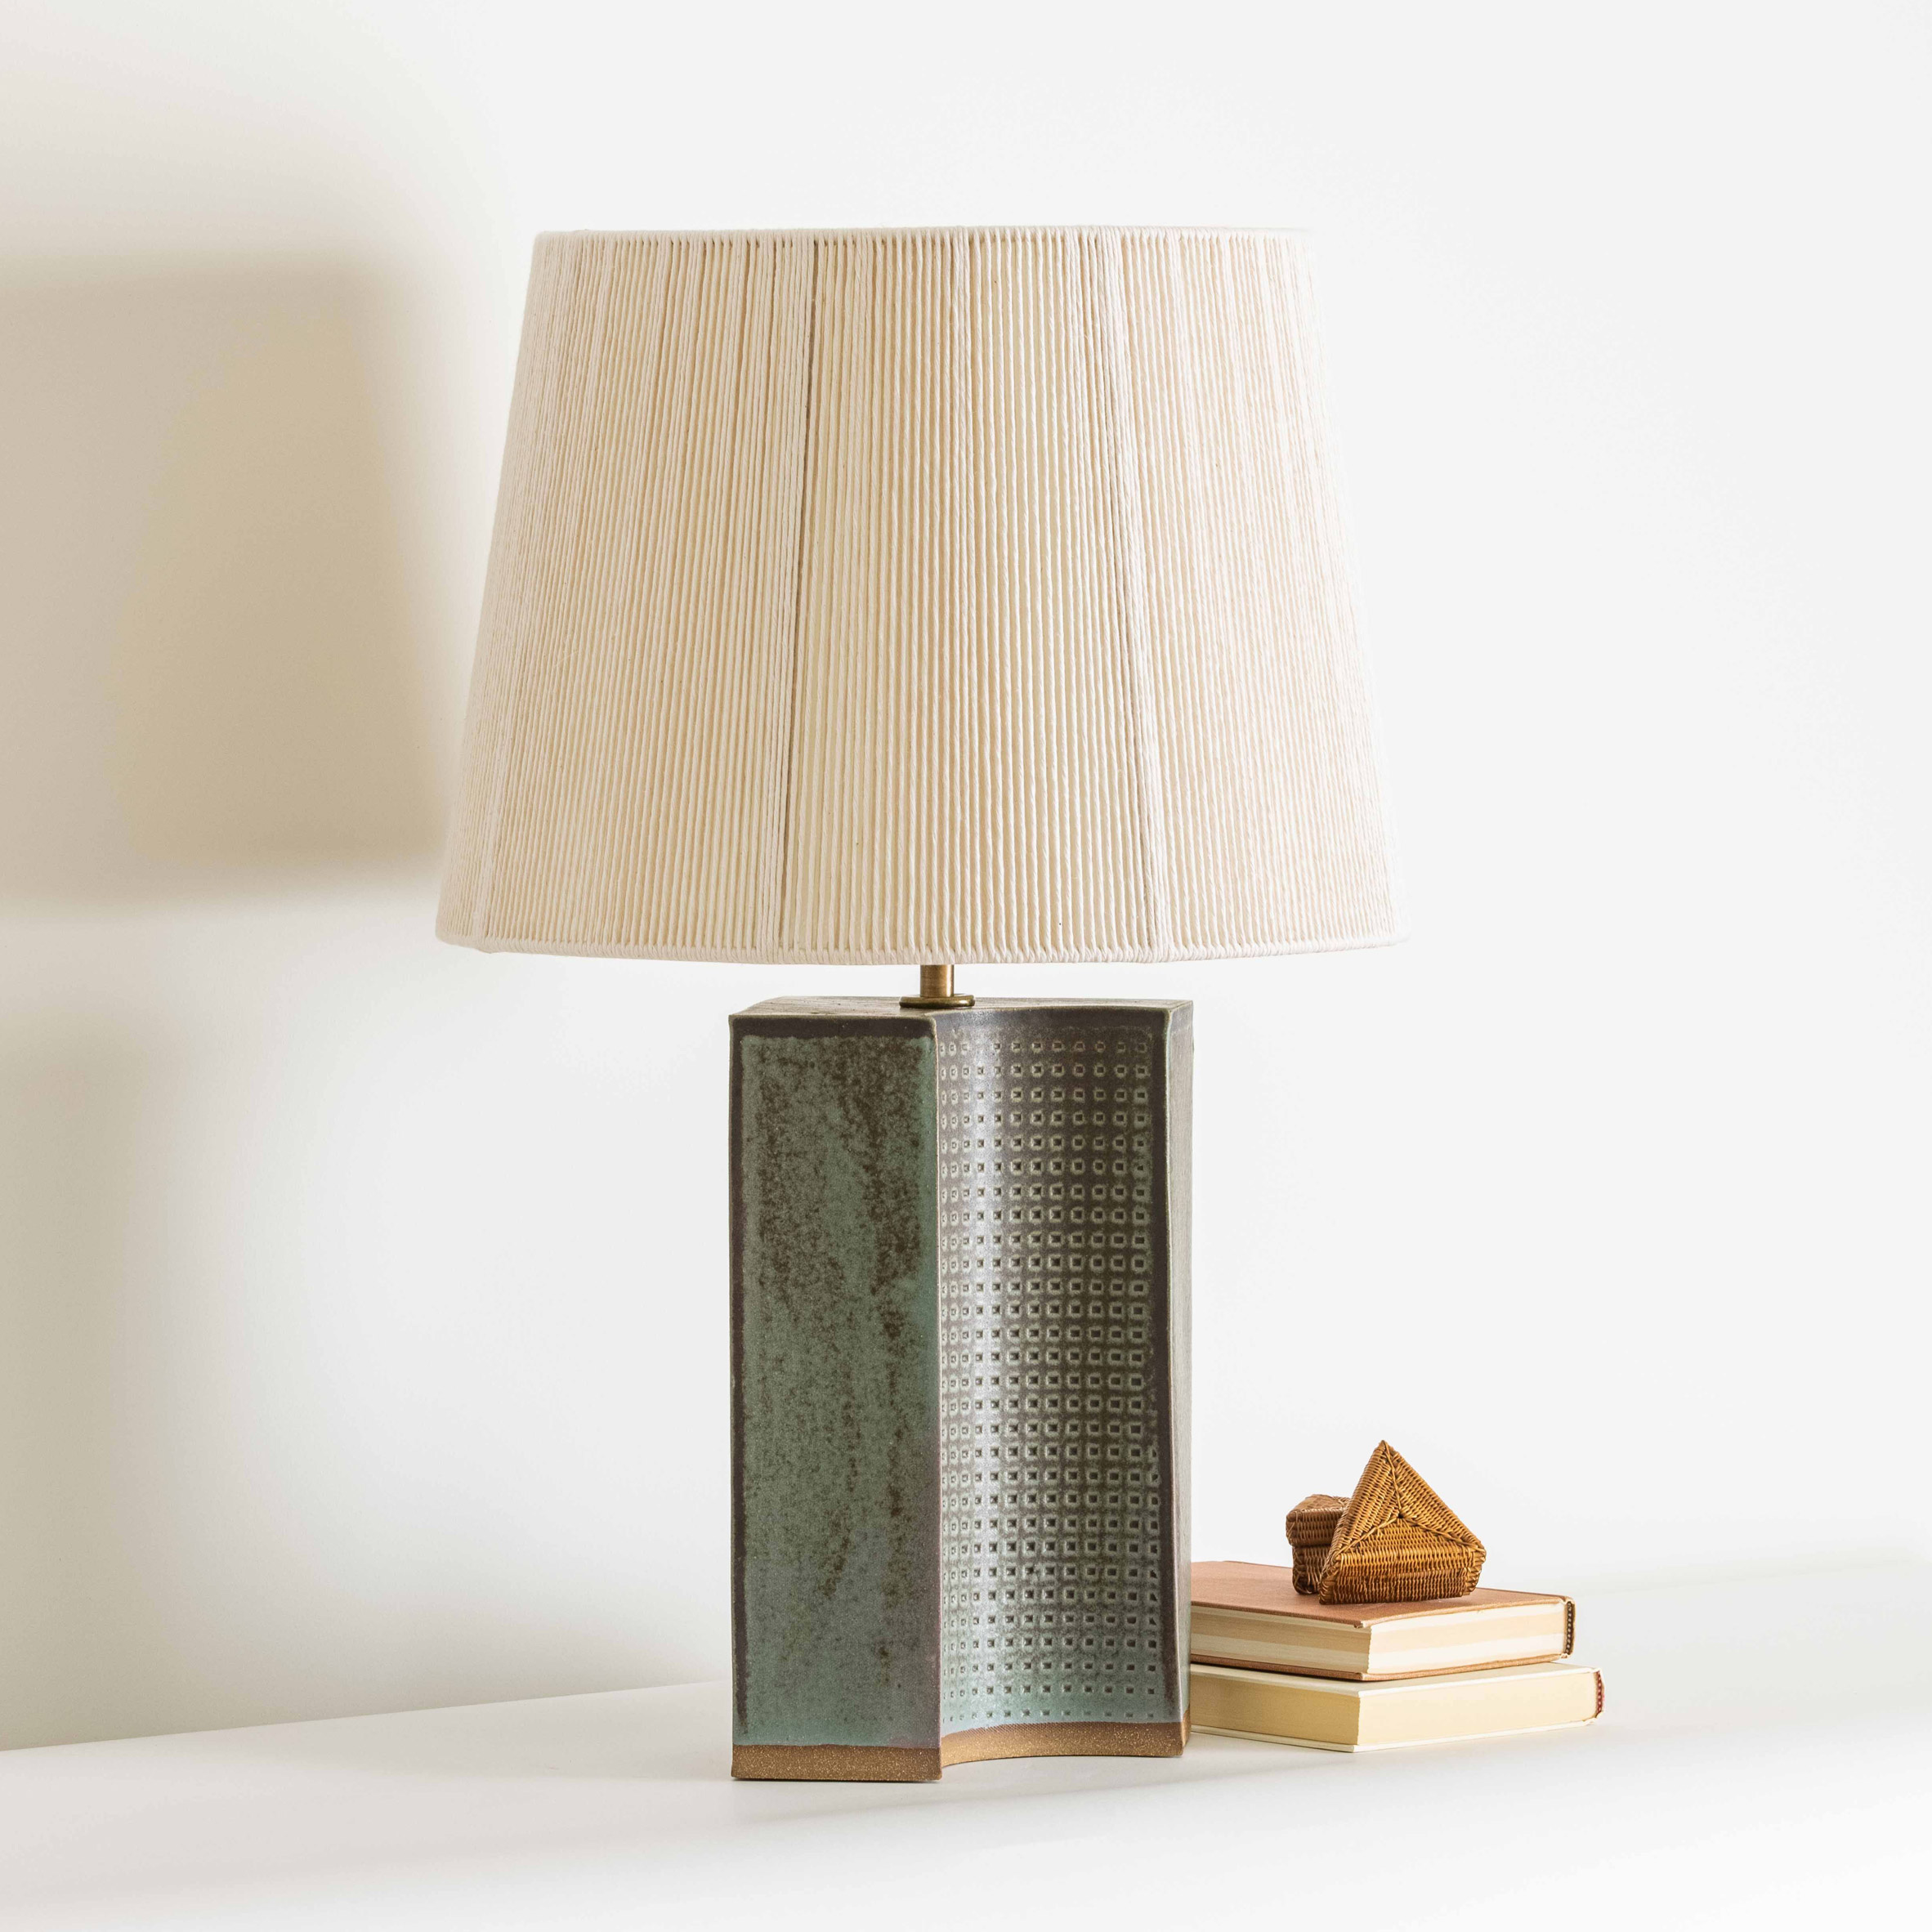 Lamp design with punctuated holes